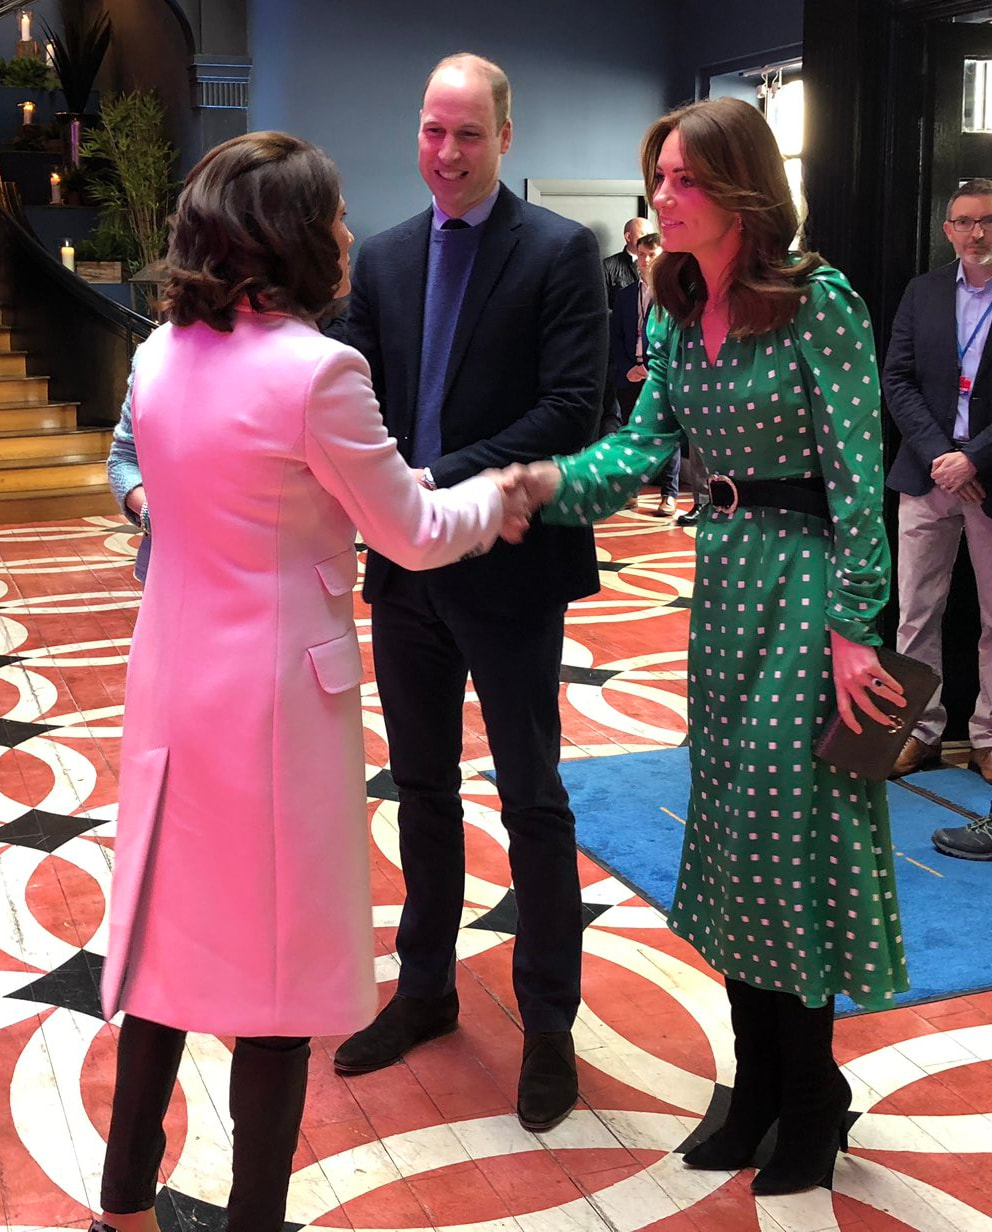 The Duke and Duchess of Cambrideg at Tribeton. Greeted by Minister Josepha Madigan and Galway 2020 CEO Patricia Philbin